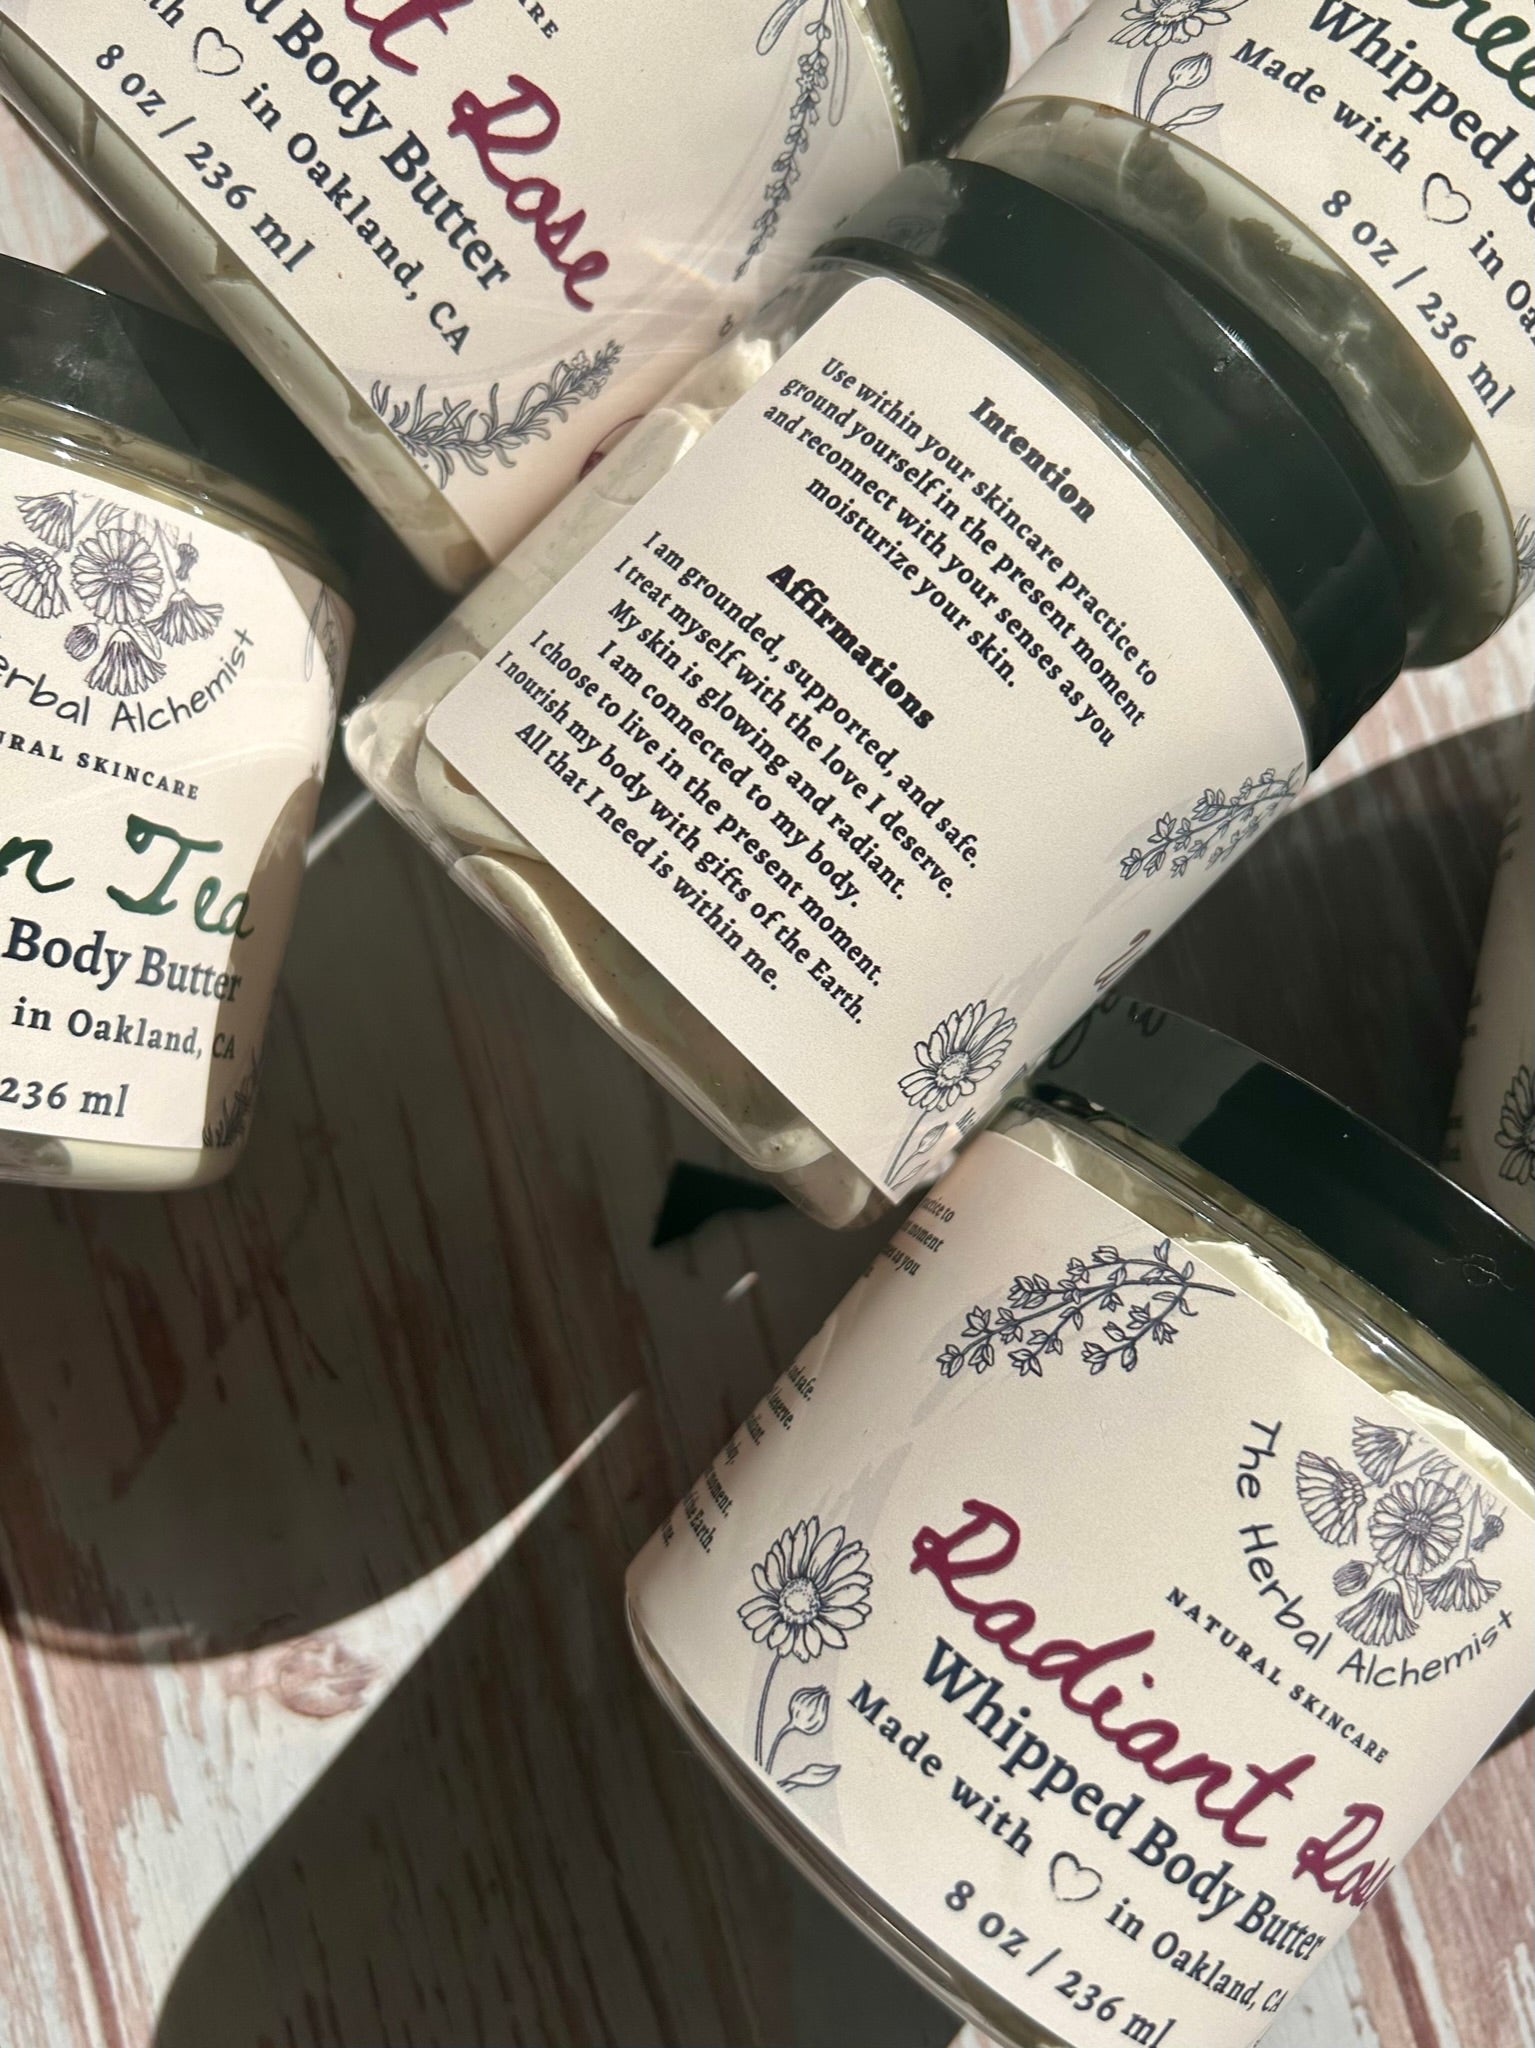 Affirmation body butter, made with intention, whipped to perfection